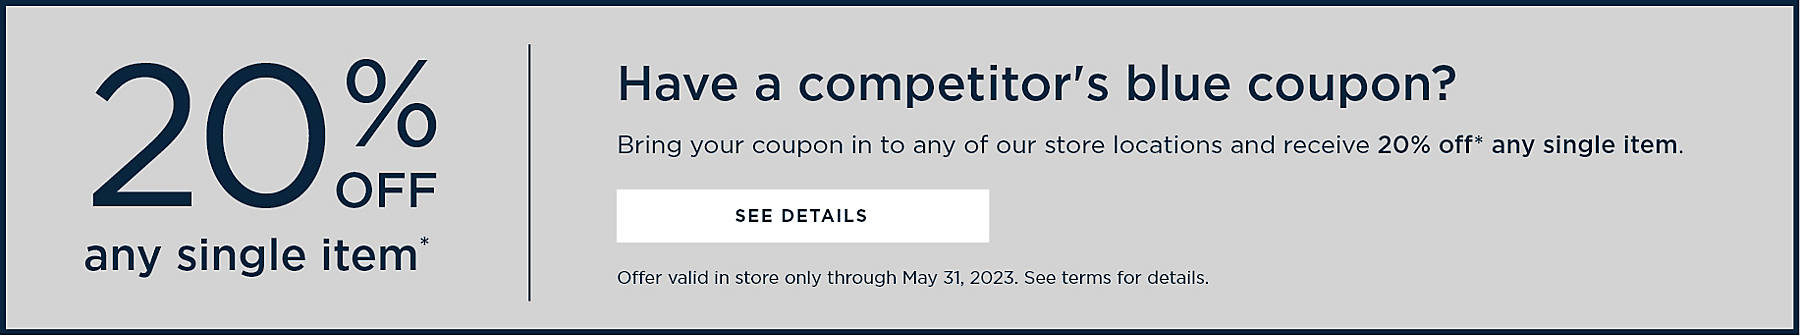 20% off any single item* Have a competitor's blue coupon? Bring your coupon in to any of our store locations and receive 20% off* any single item. Bring your unexpired Bed, Bath & Beyond coupon to Kirkland's Home and receive 20% off any single item, in store only. Discount will be applied to highest priced qualifying item in transaction. Offer excludes clearance merchandise and may not be combined with an employee discount,corporate sales discount, as-is or damage discount, or any other coupon. One time use only. Must surrender coupon at time of purchase. Not valid on previous purchases, shipping or delivery fees, and may not be applied to the purchase of gift cards. Coupons are not valid at closing stores. Offer ends 5/31/23 @ 11:59 PM CST. No cash value. Void where prohibited by law. Kirkland's Home reserves the right to end or modify the promotion at any time. Other restrictions may apply.